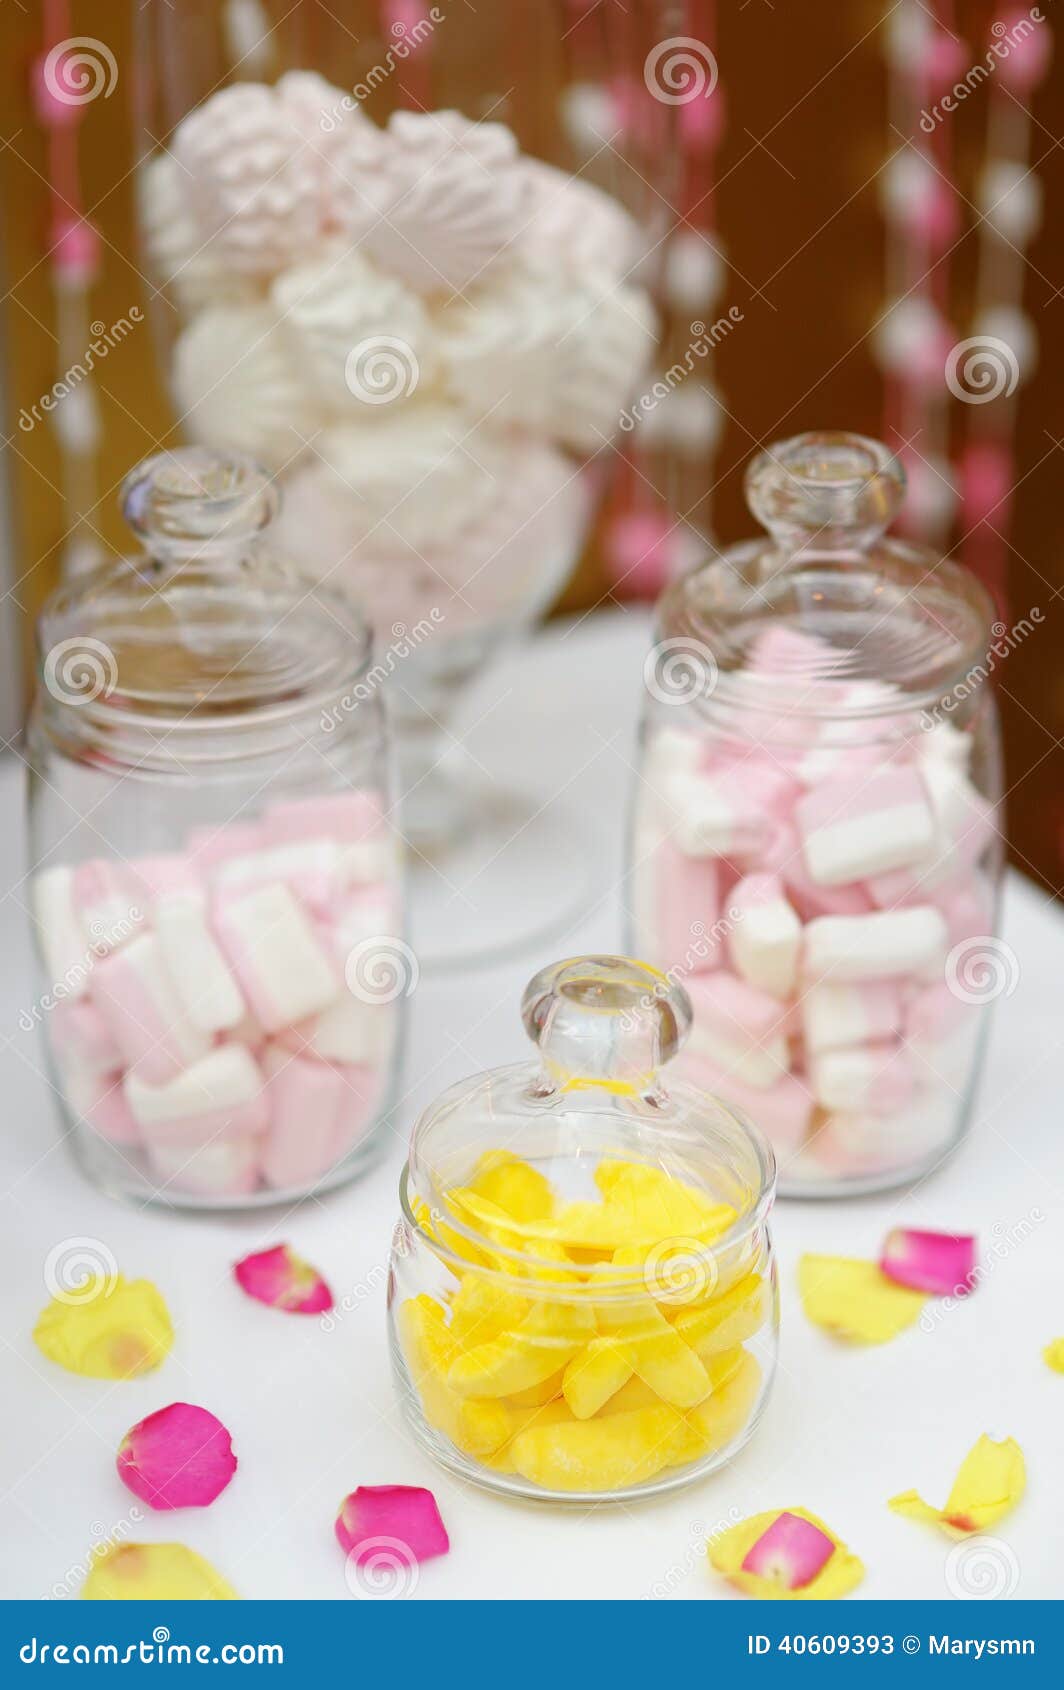 Yellow Fruit Candy And Marshmallow In Glass Jars Stock Image Image Of Nameboard Fairy 40609393